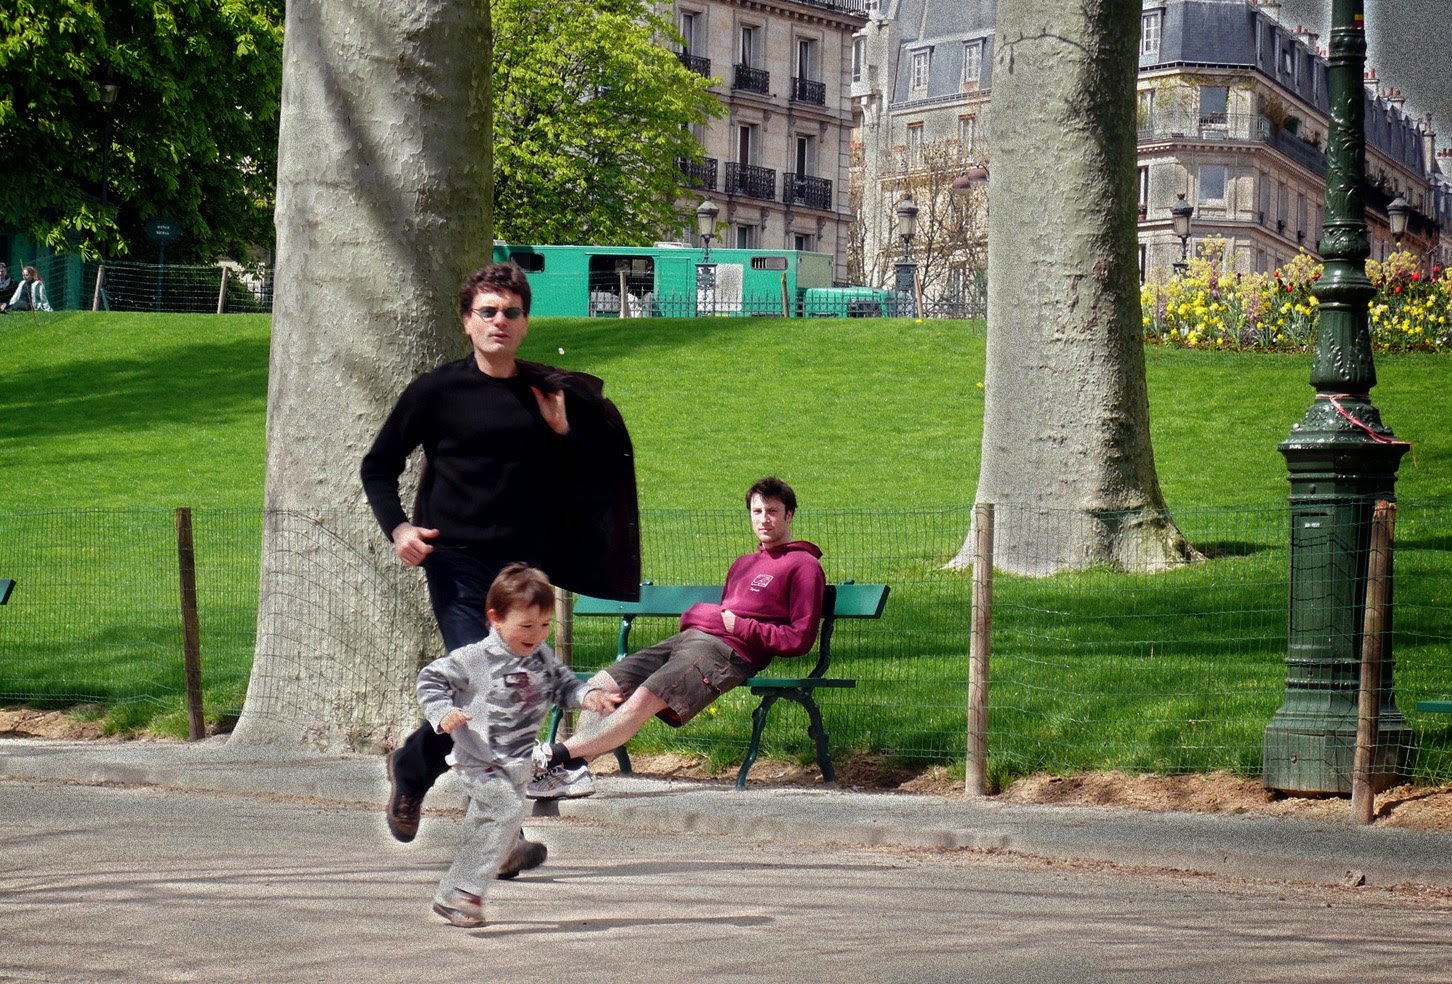 [Buttes+Chaumont.jpg]